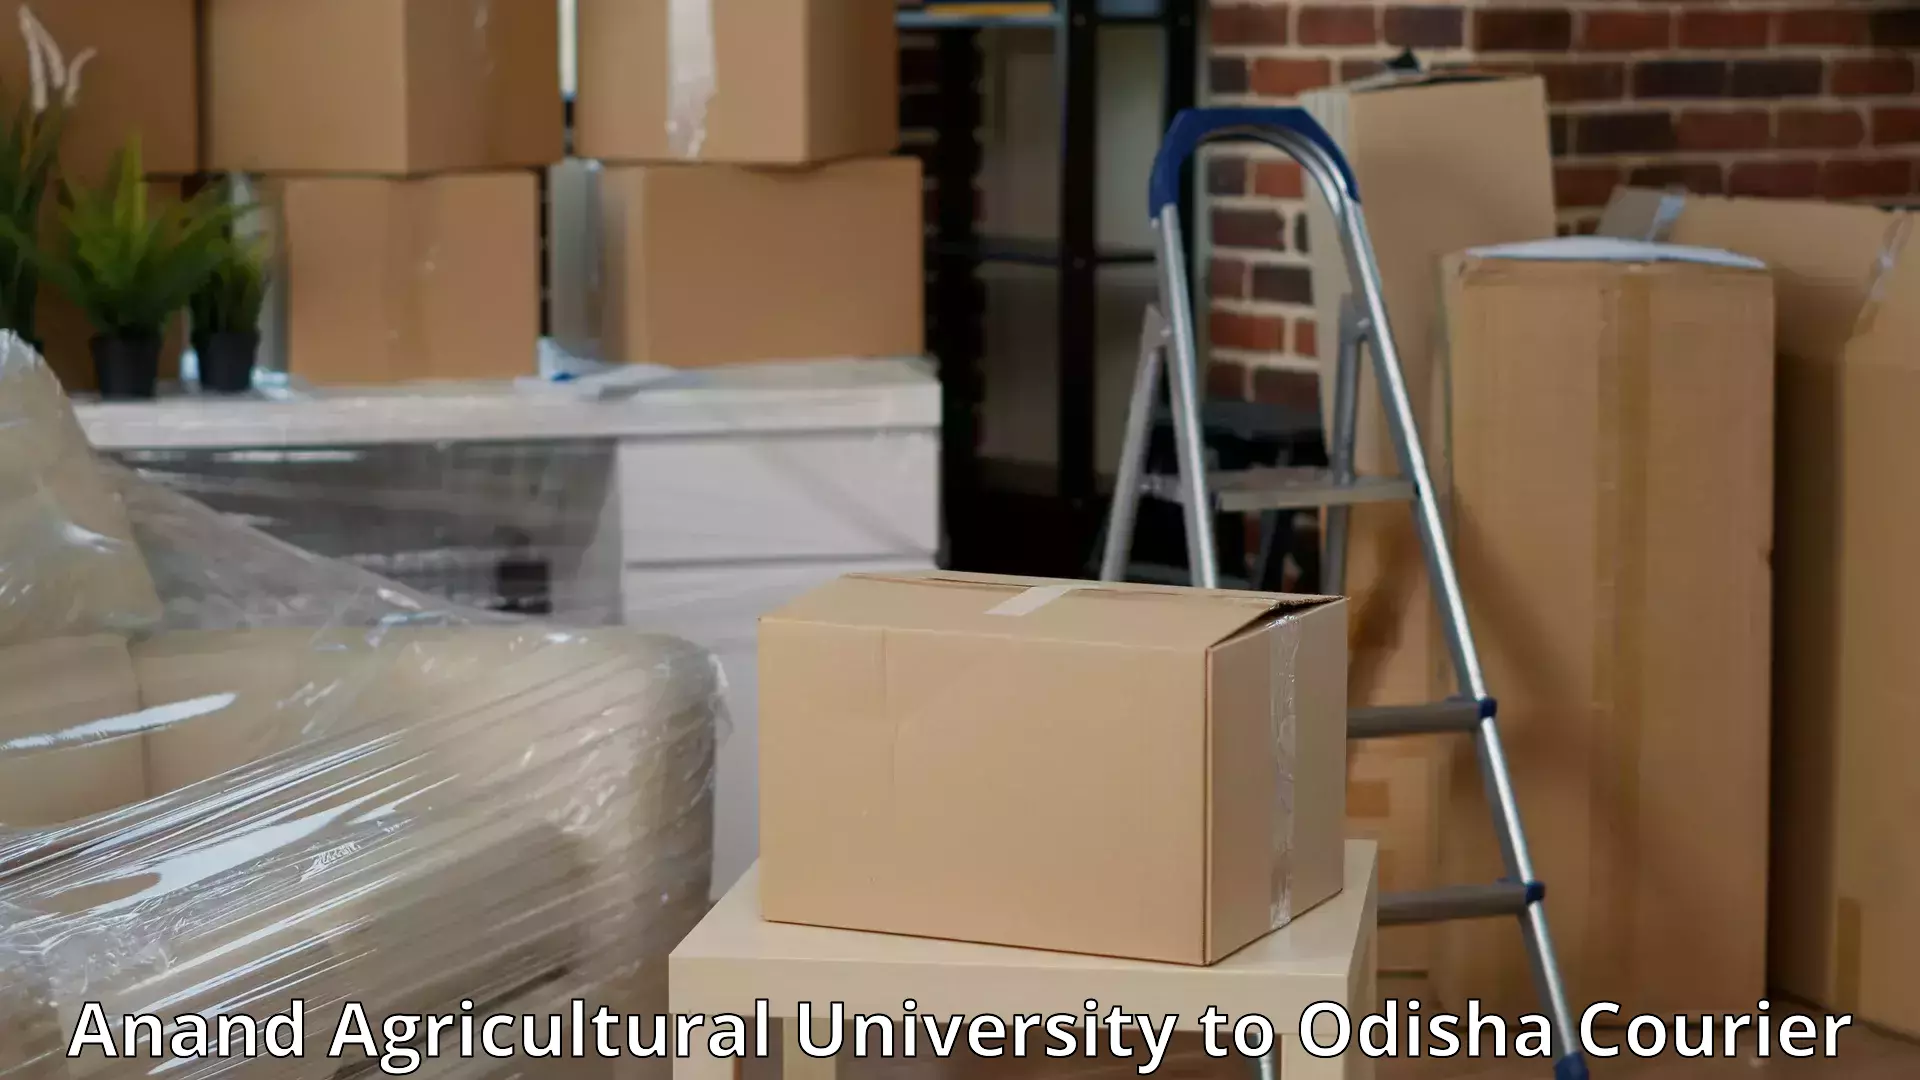 Furniture moving plans in Anand Agricultural University to Muniguda